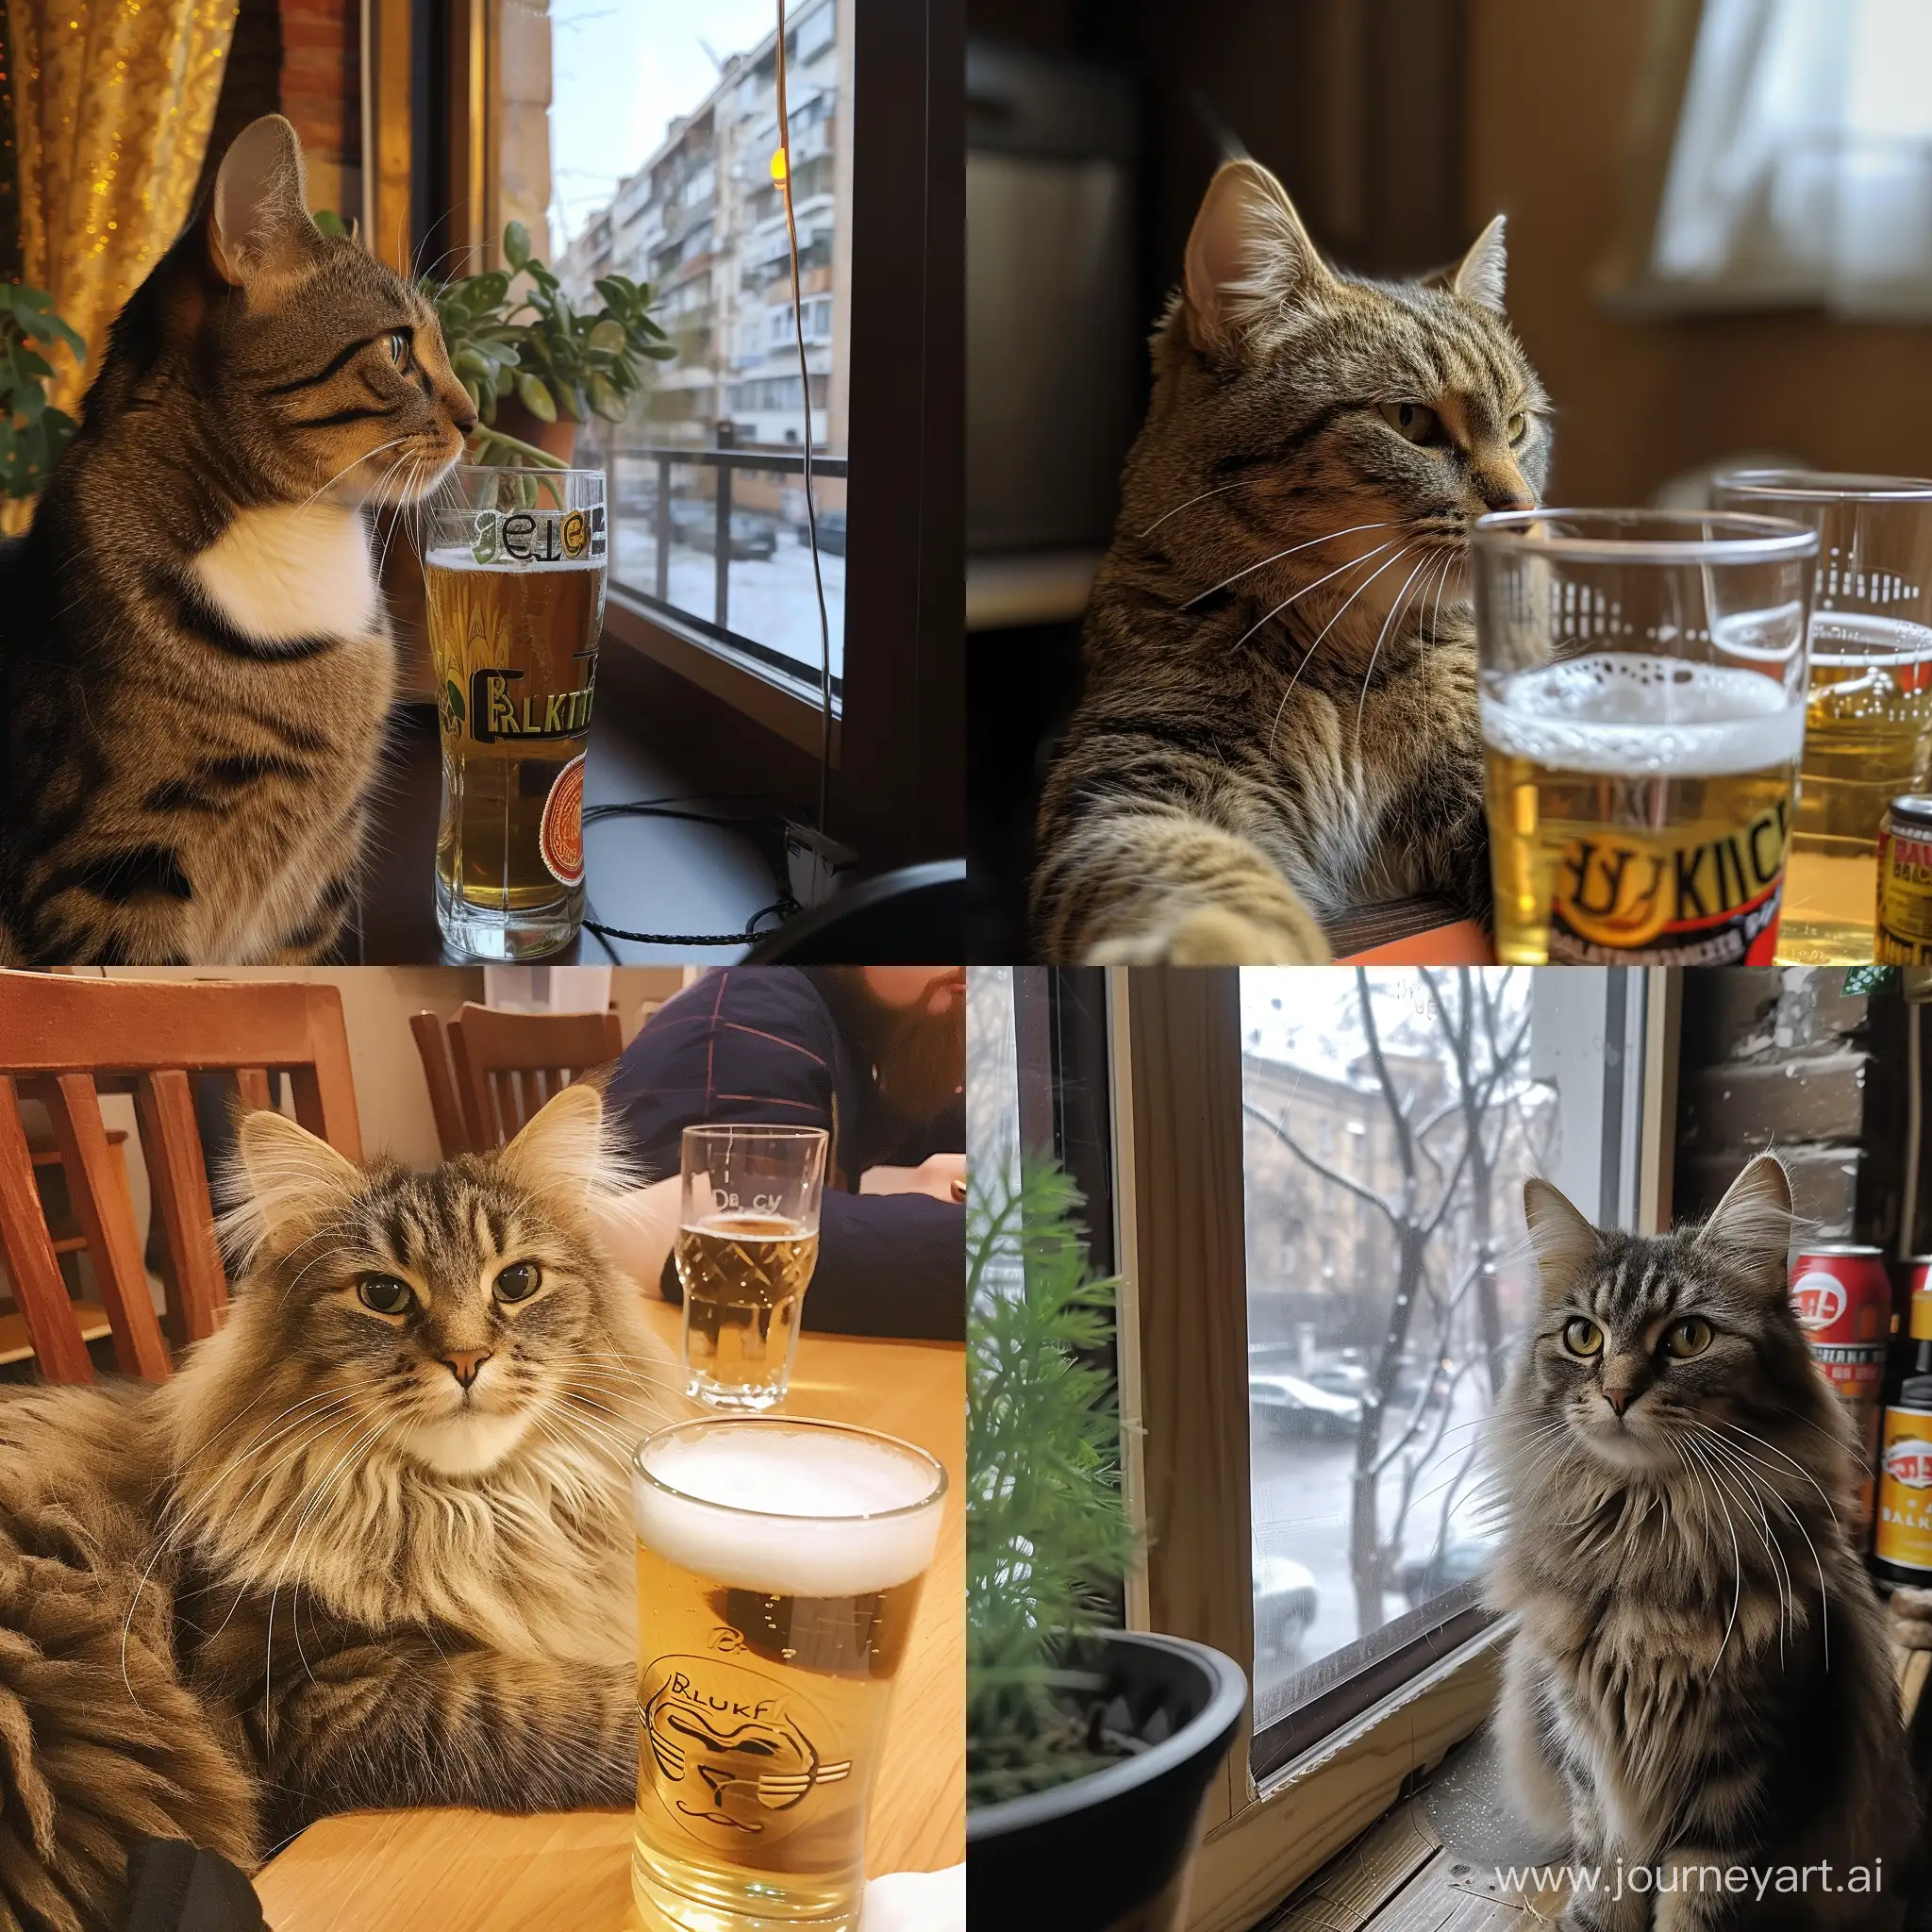 Skuf-the-Cat-Enjoying-a-Drink-in-the-Communal-Apartment